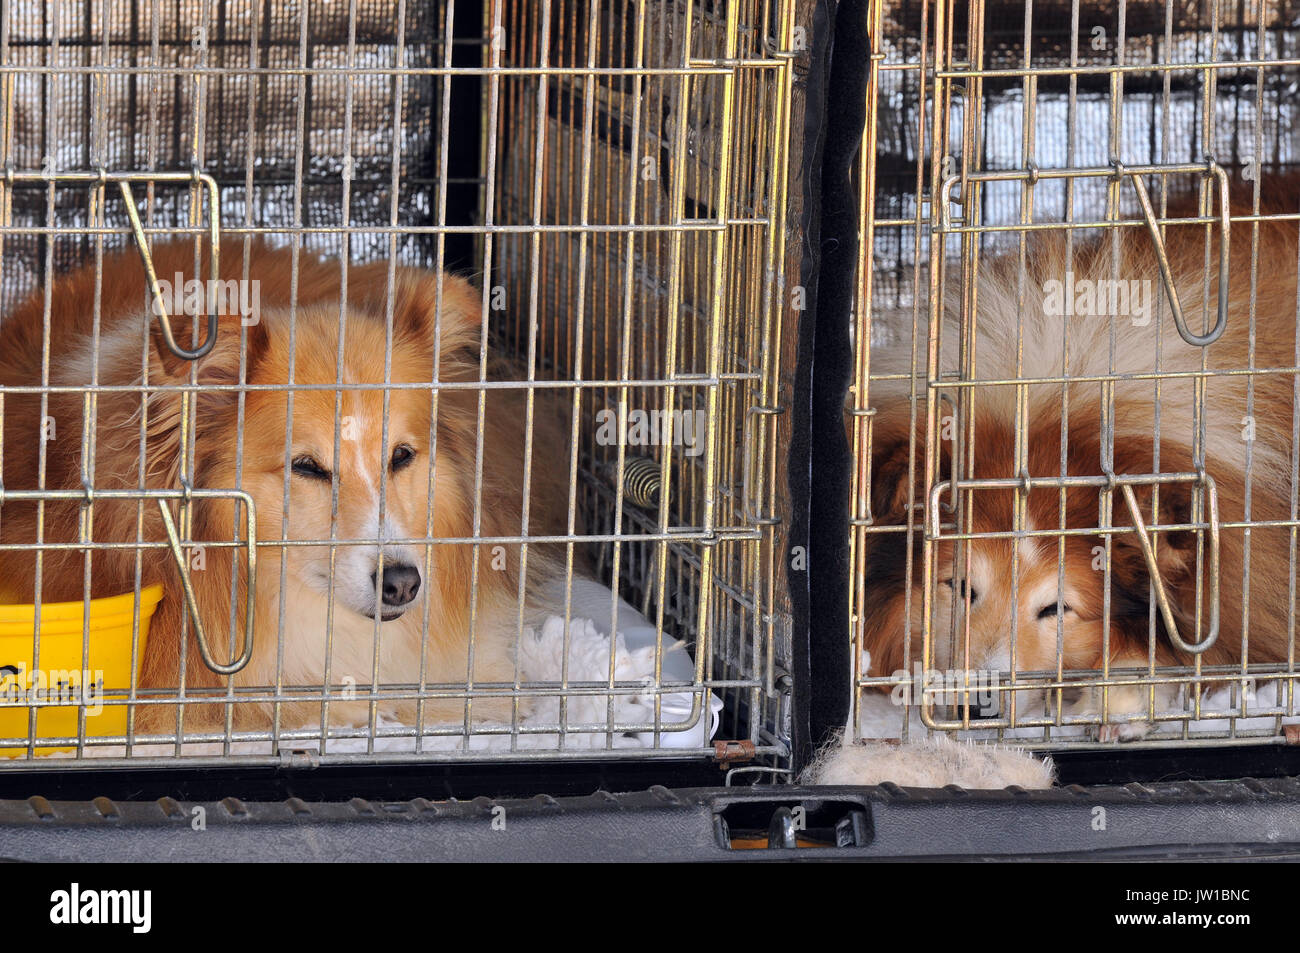 Two collie or lassie dogs in crates or cages in the back of a car, one dog looking out and the other pooch asleep. Keeping pets in cars for traveling. Stock Photo